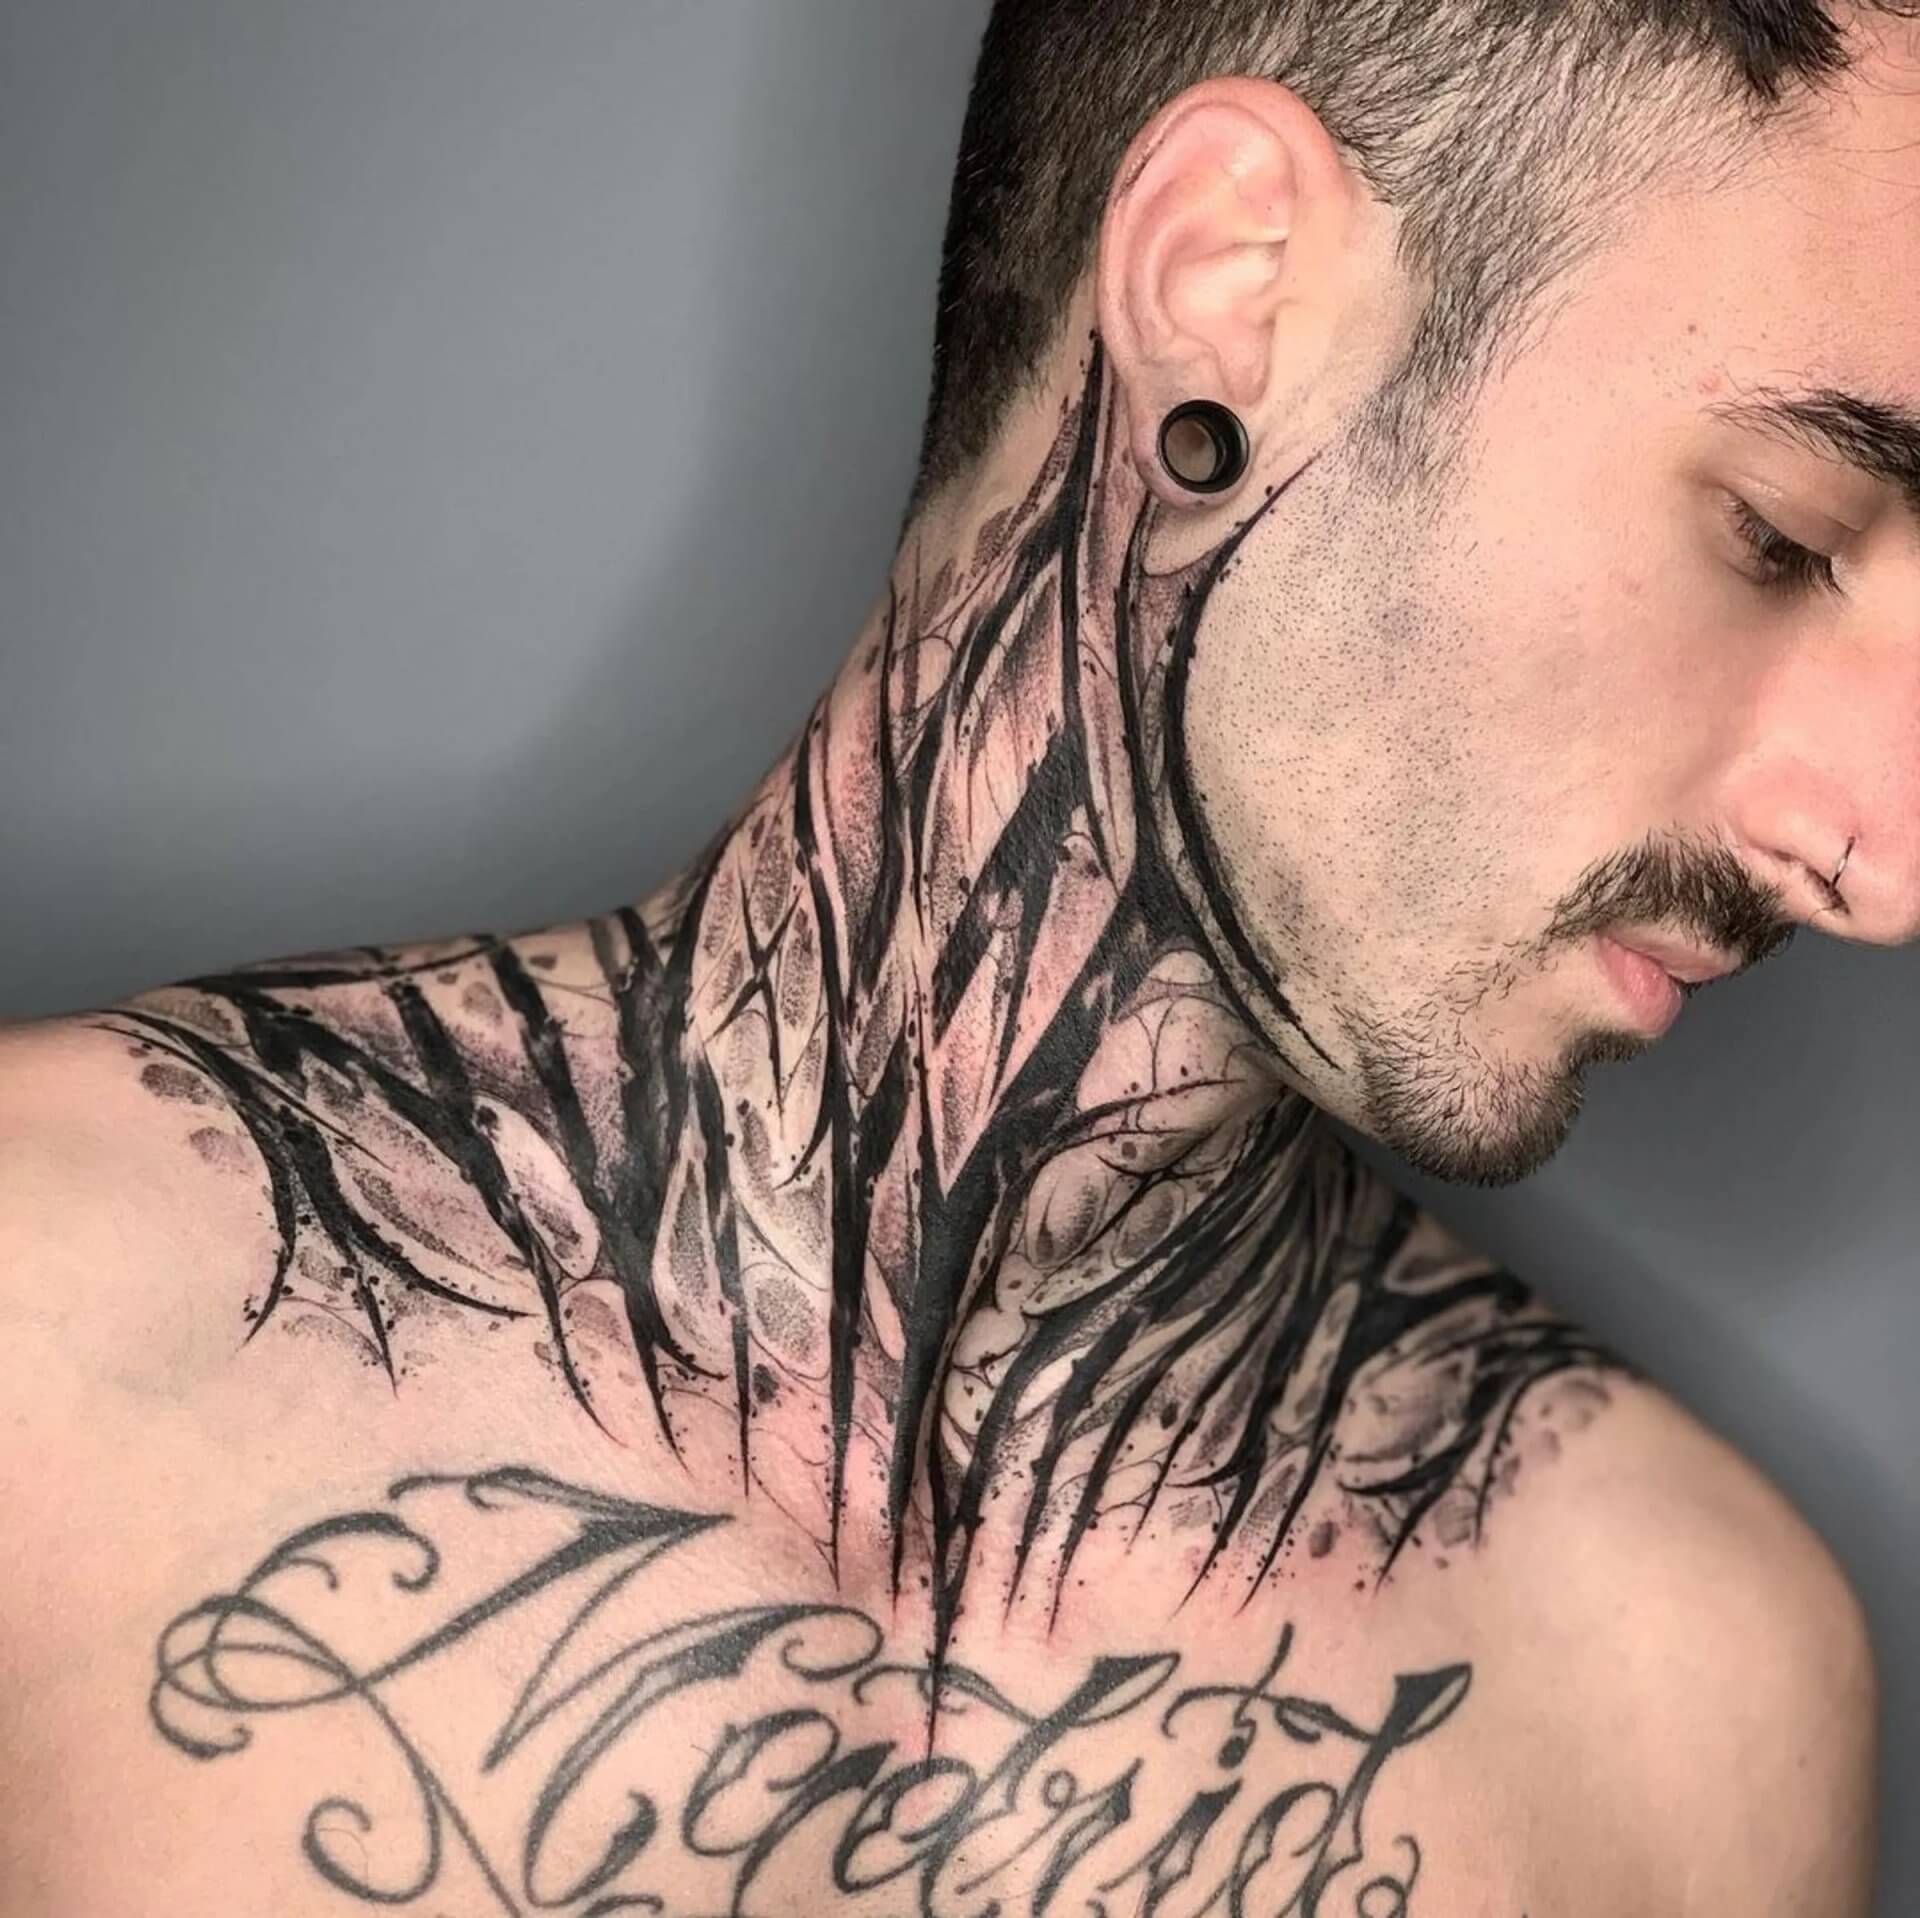 Thanks for... - Neck & Throat Tattoos | Facebook